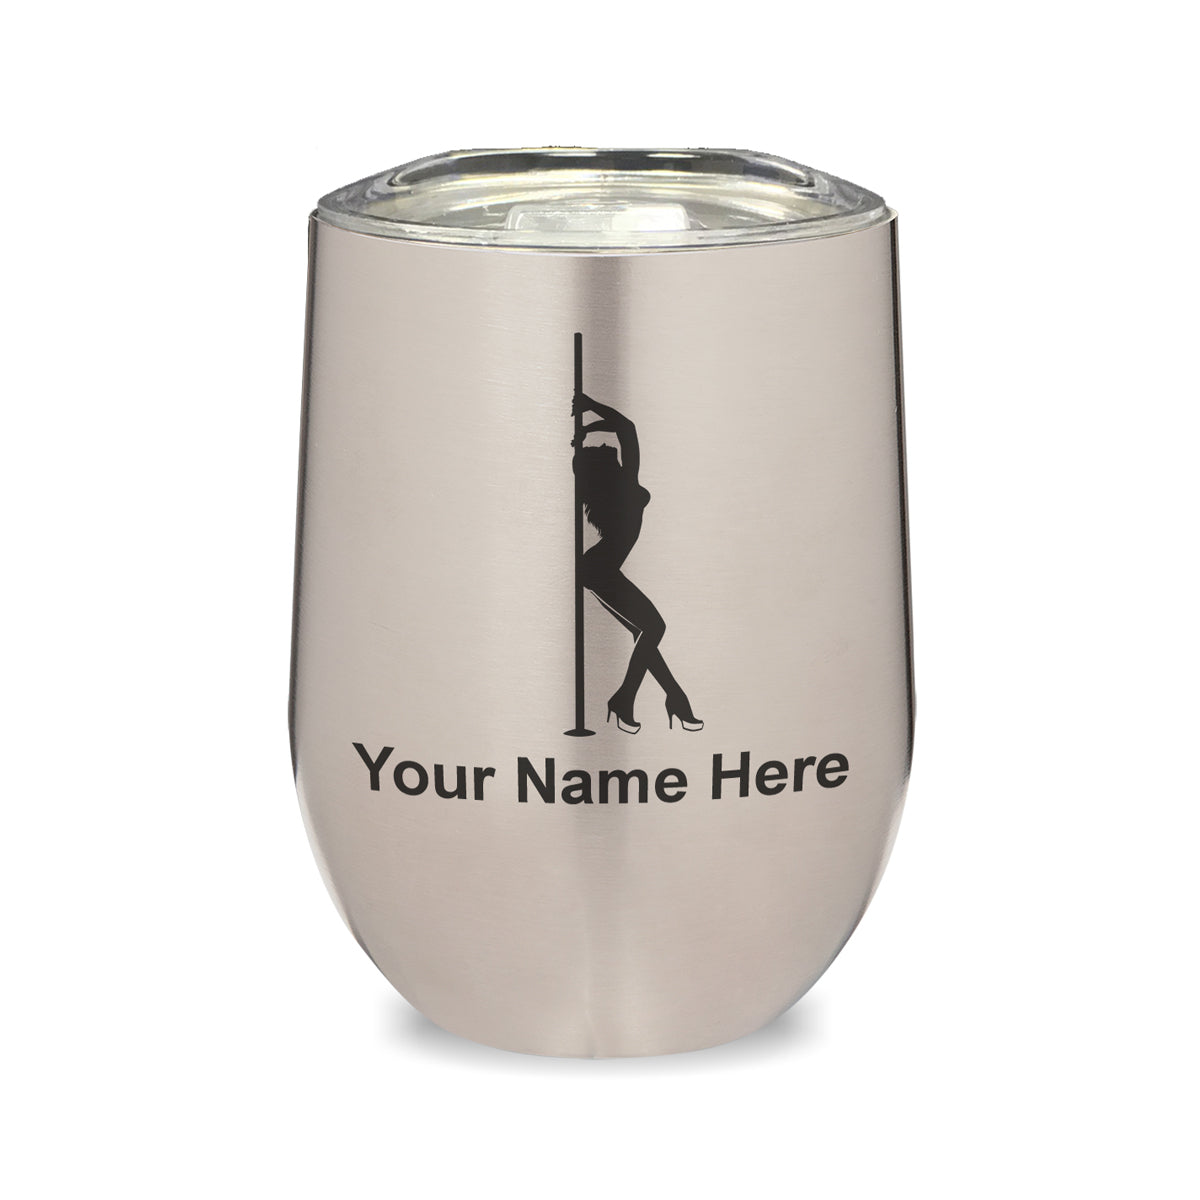 LaserGram Double Wall Stainless Steel Wine Glass, Pole Dancer, Personalized Engraving Included